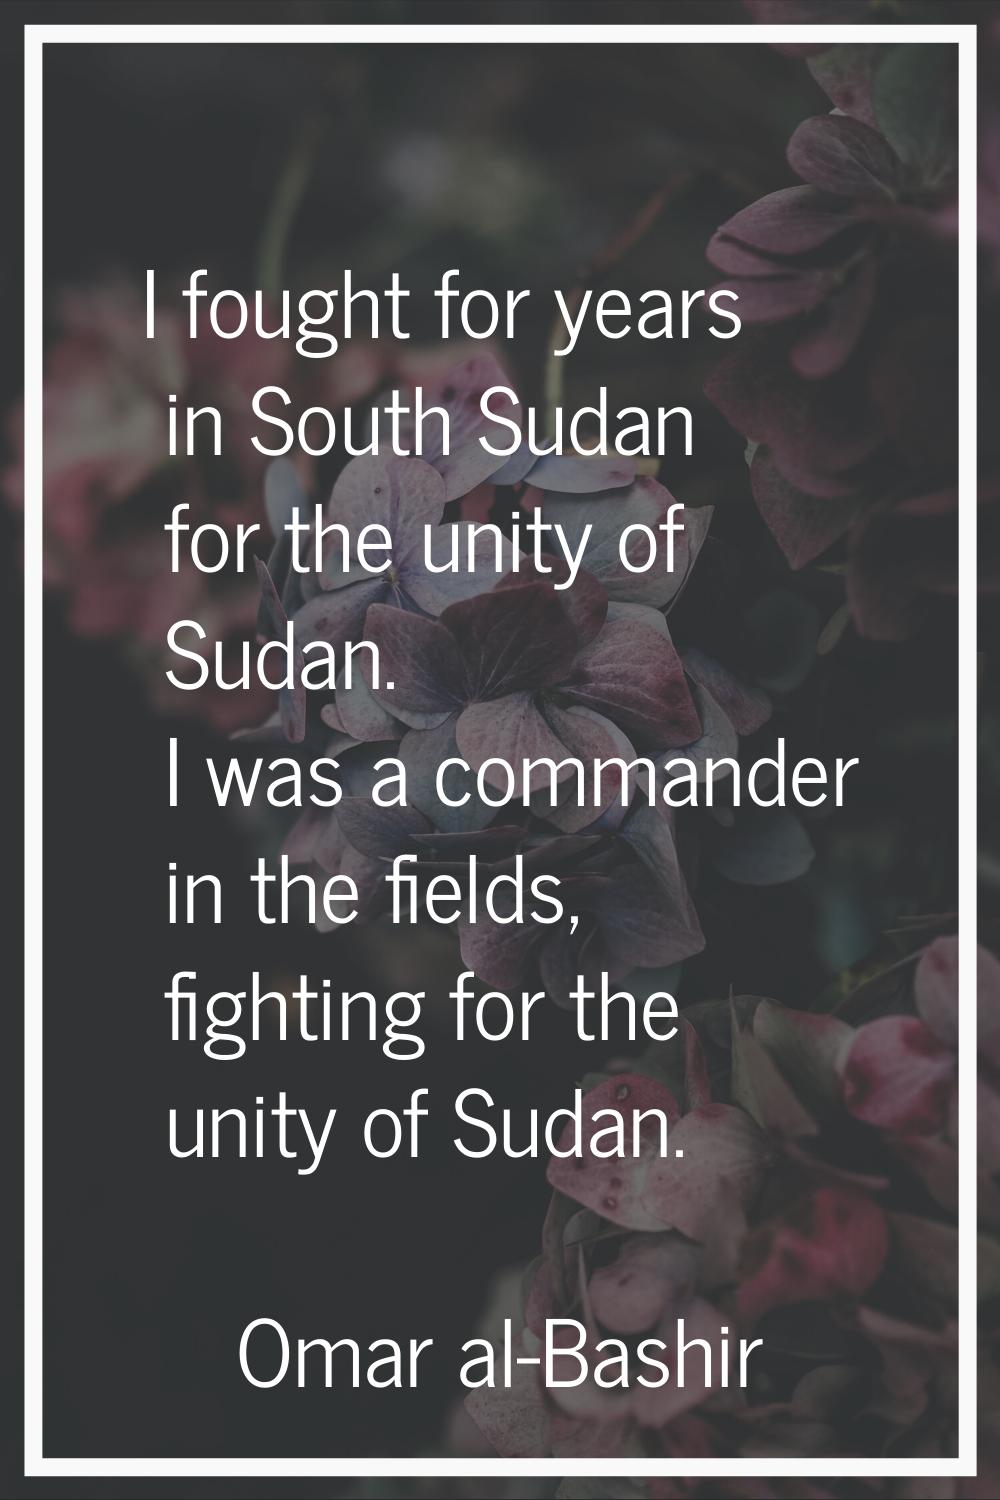 I fought for years in South Sudan for the unity of Sudan. I was a commander in the fields, fighting